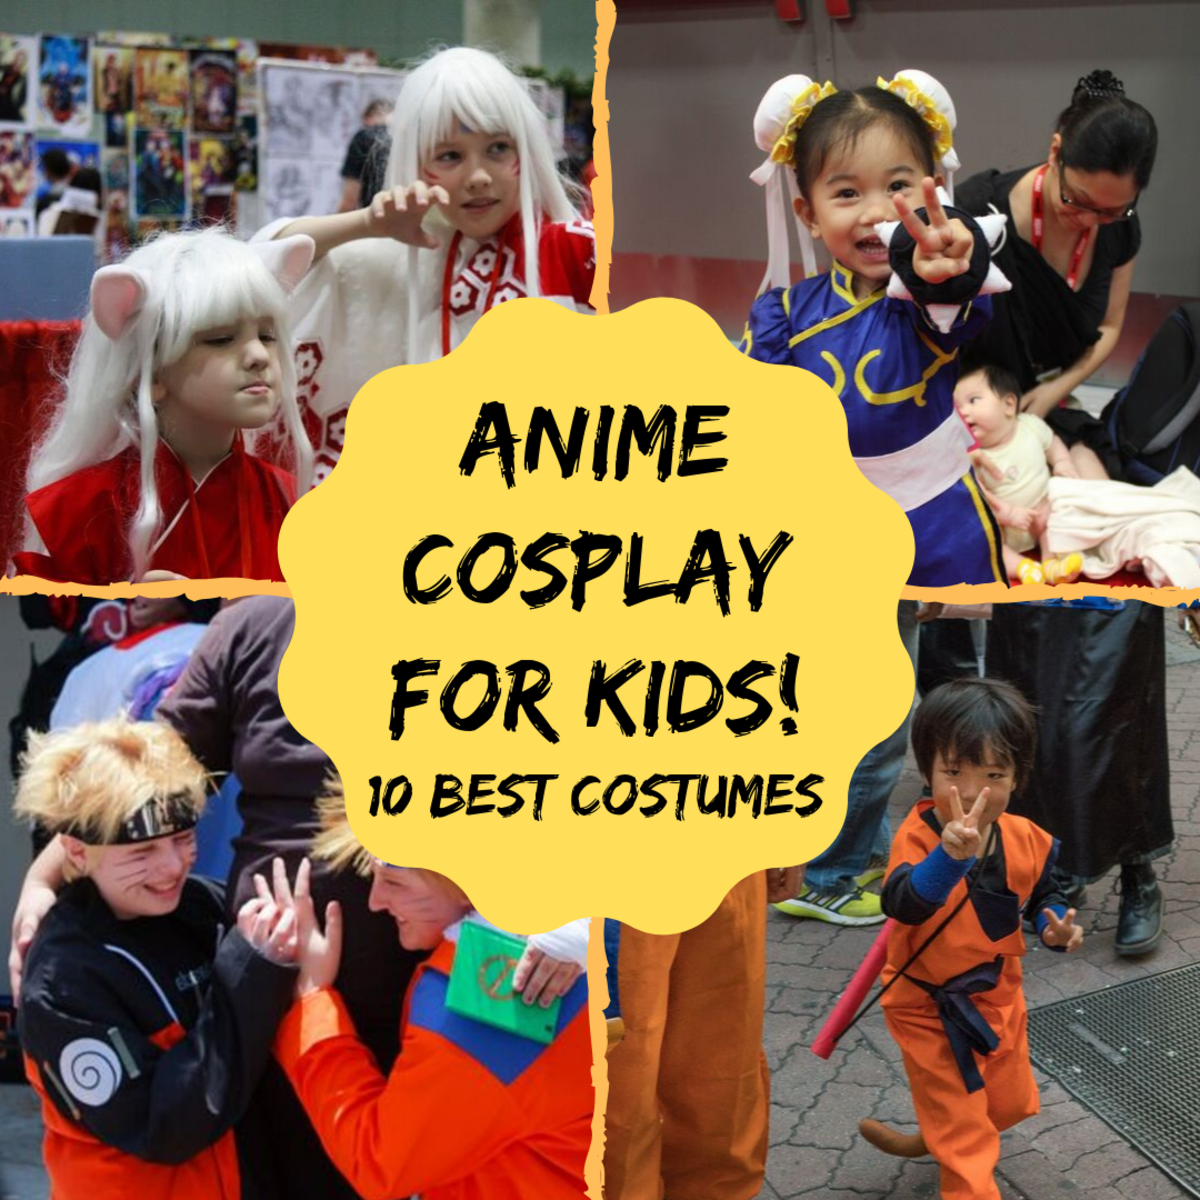 Top 10 Best Anime Cosplay Costumes for Kids